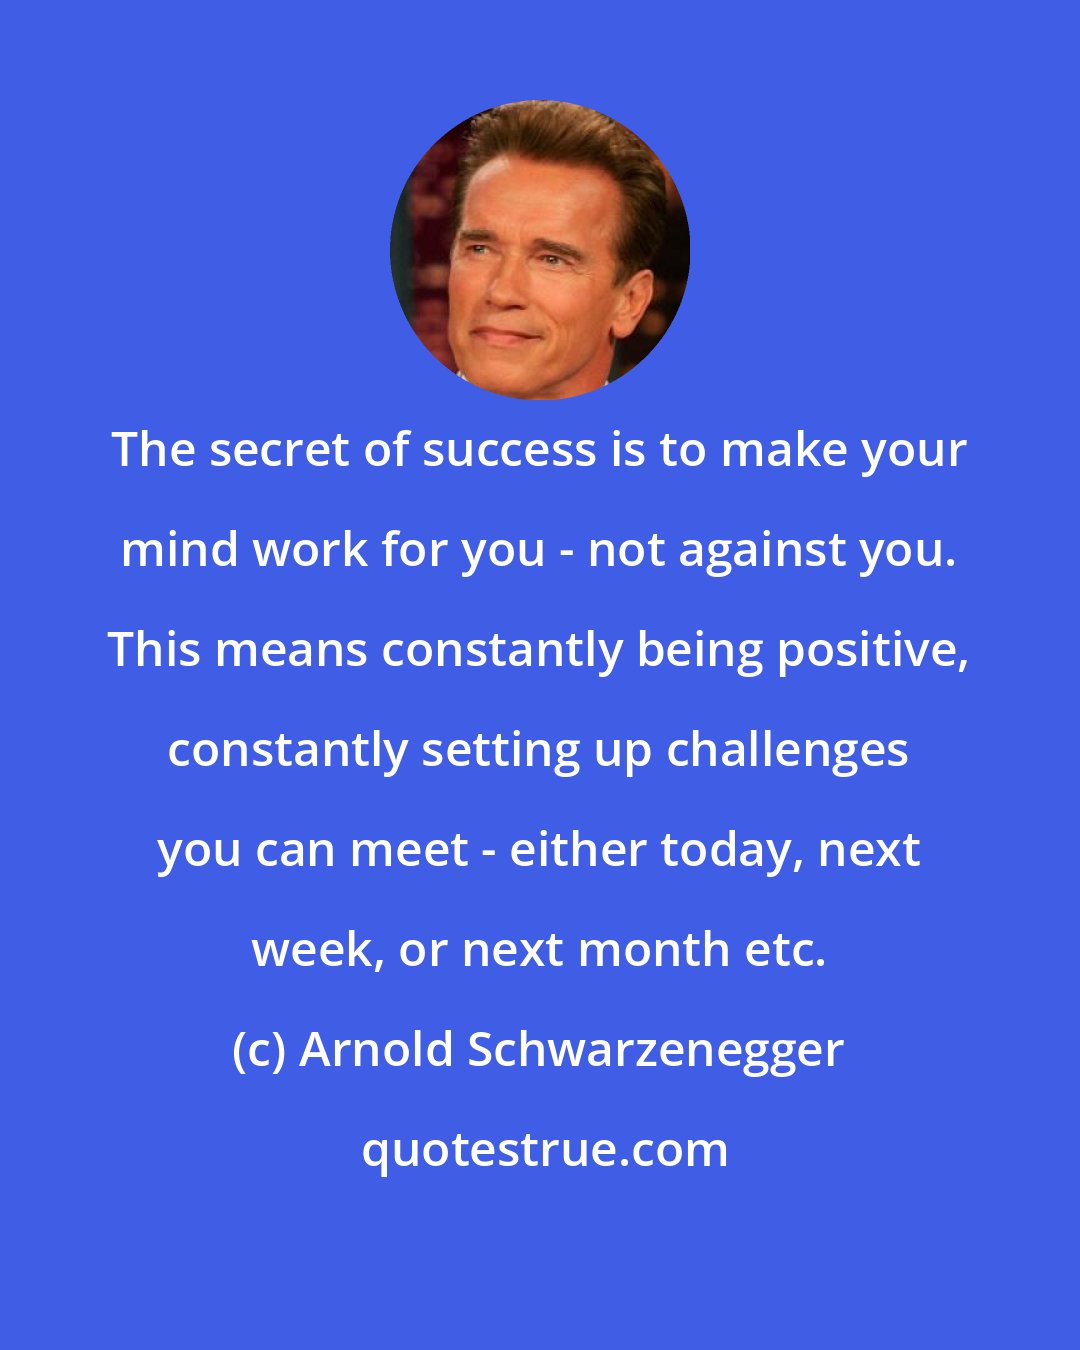 Arnold Schwarzenegger: The secret of success is to make your mind work for you - not against you. This means constantly being positive, constantly setting up challenges you can meet - either today, next week, or next month etc.